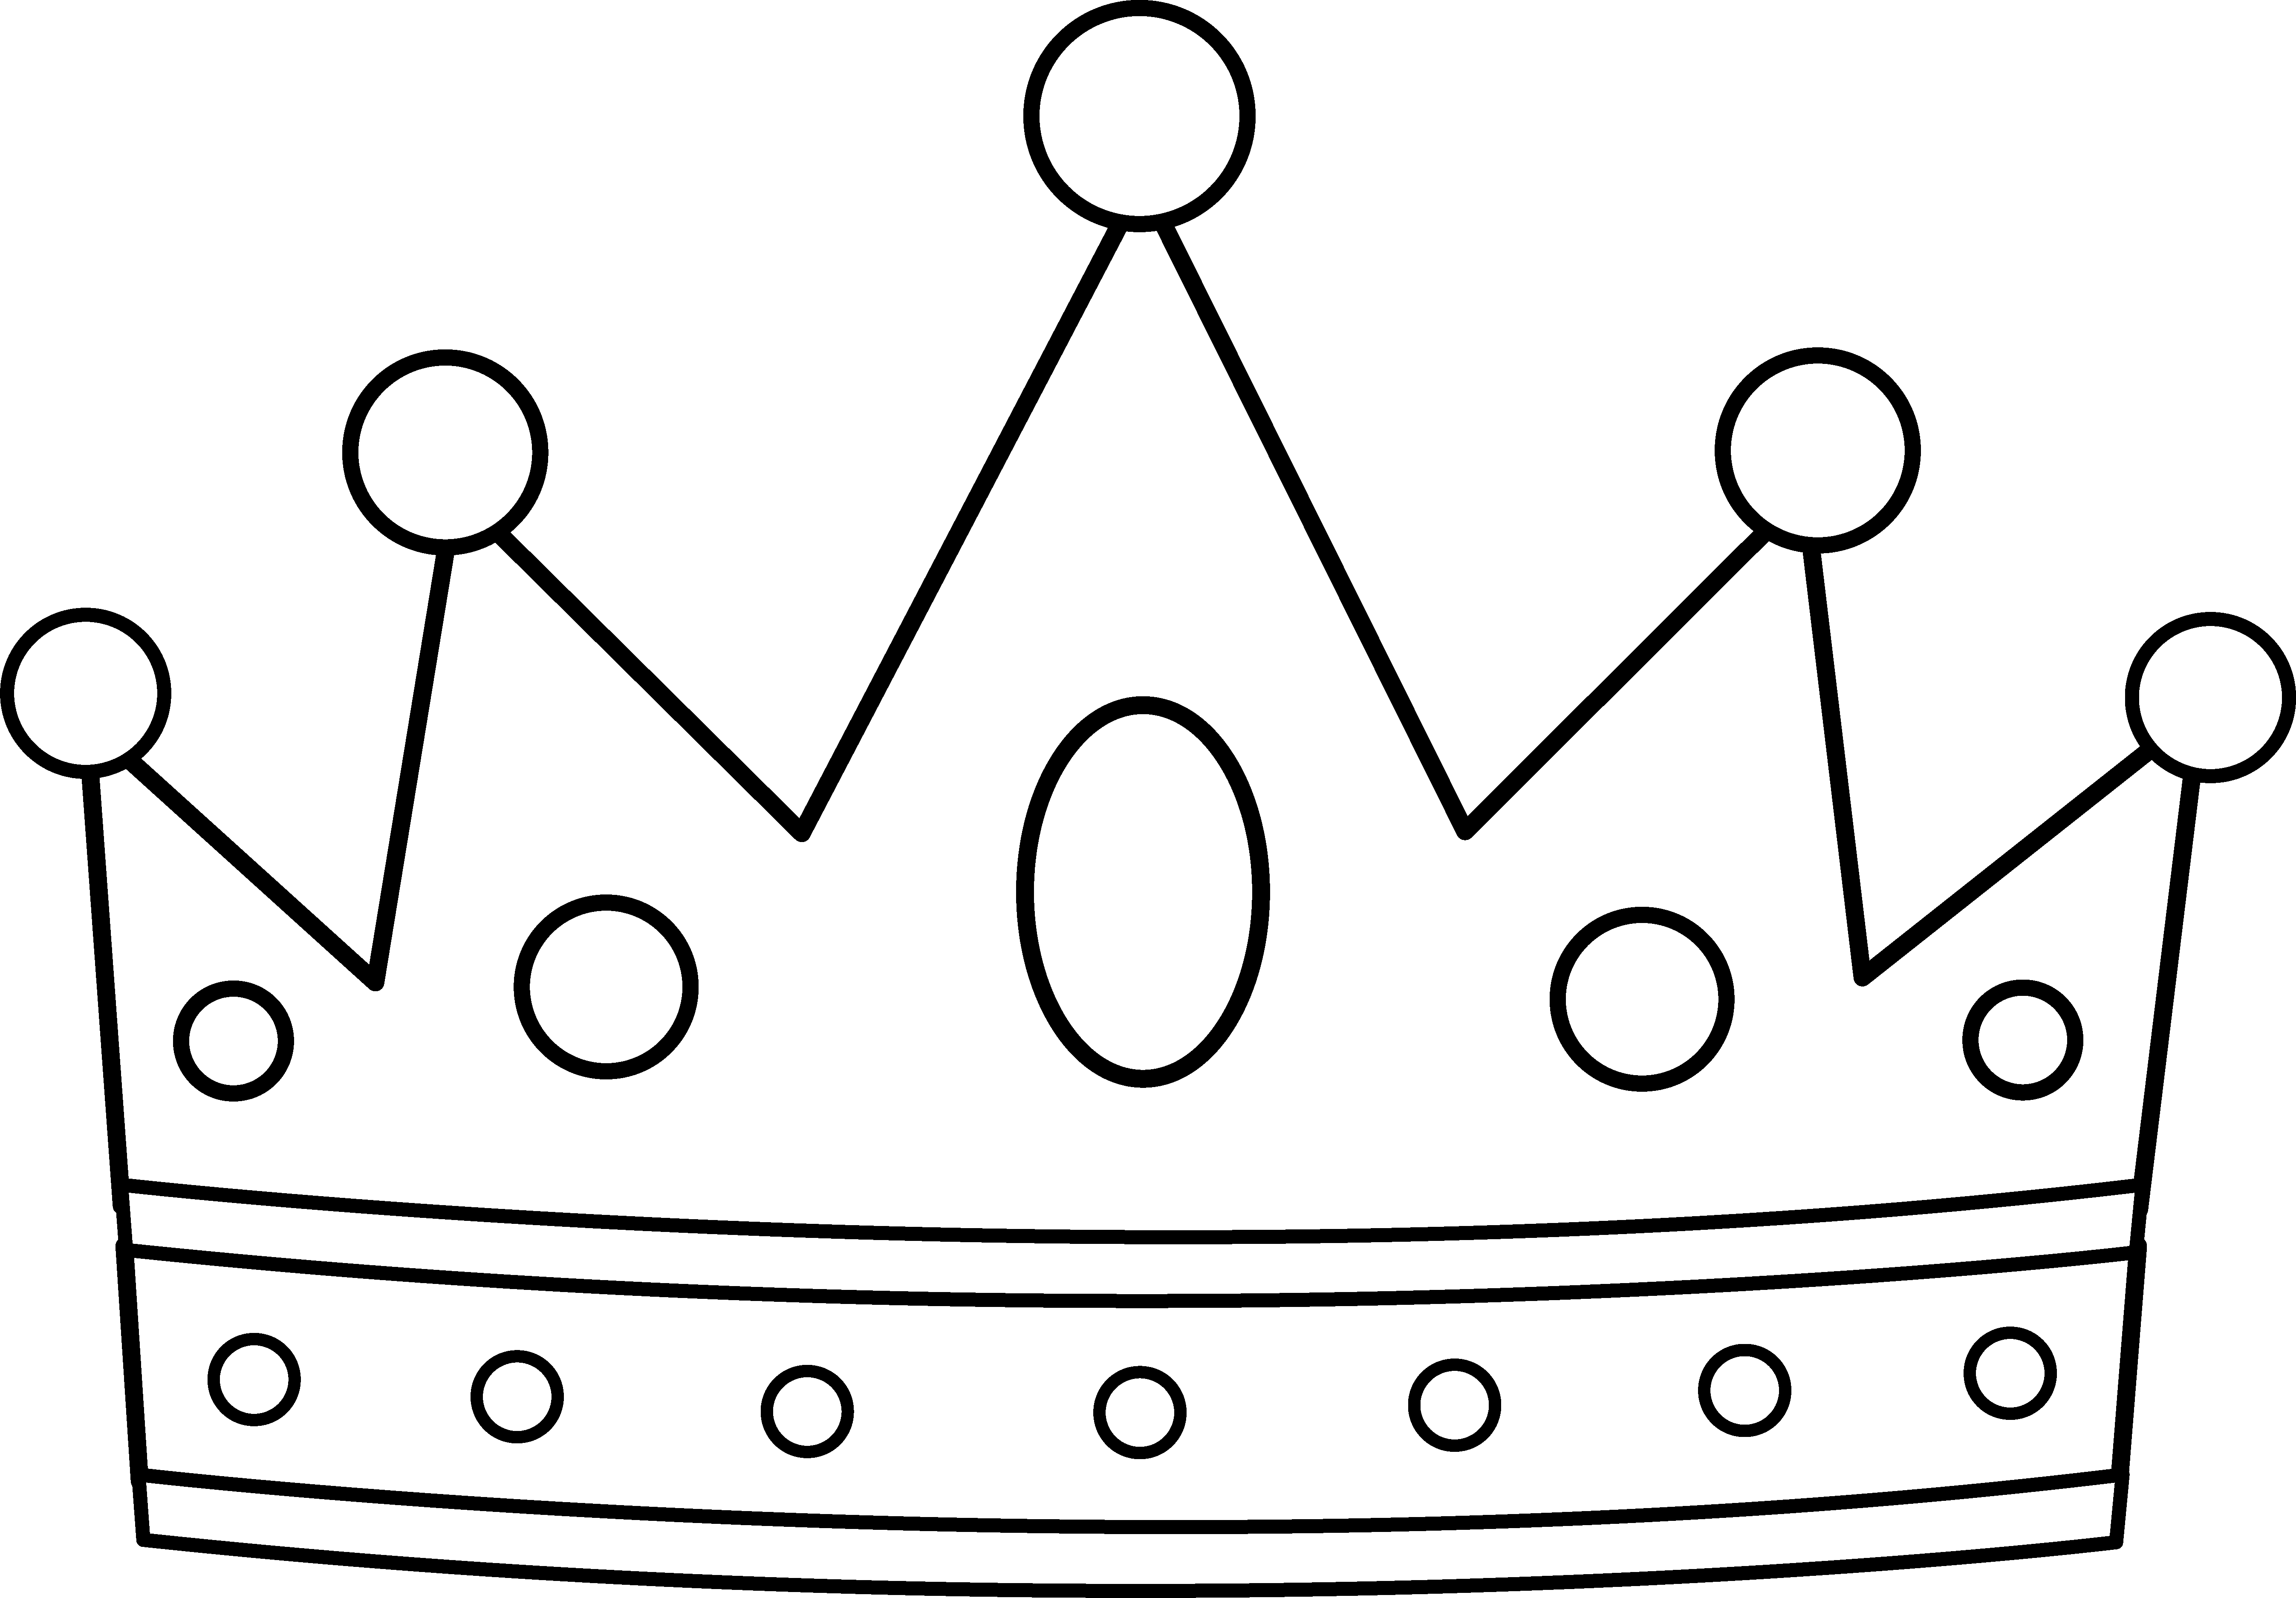 Queen Crown Clipart - Cliparts.co